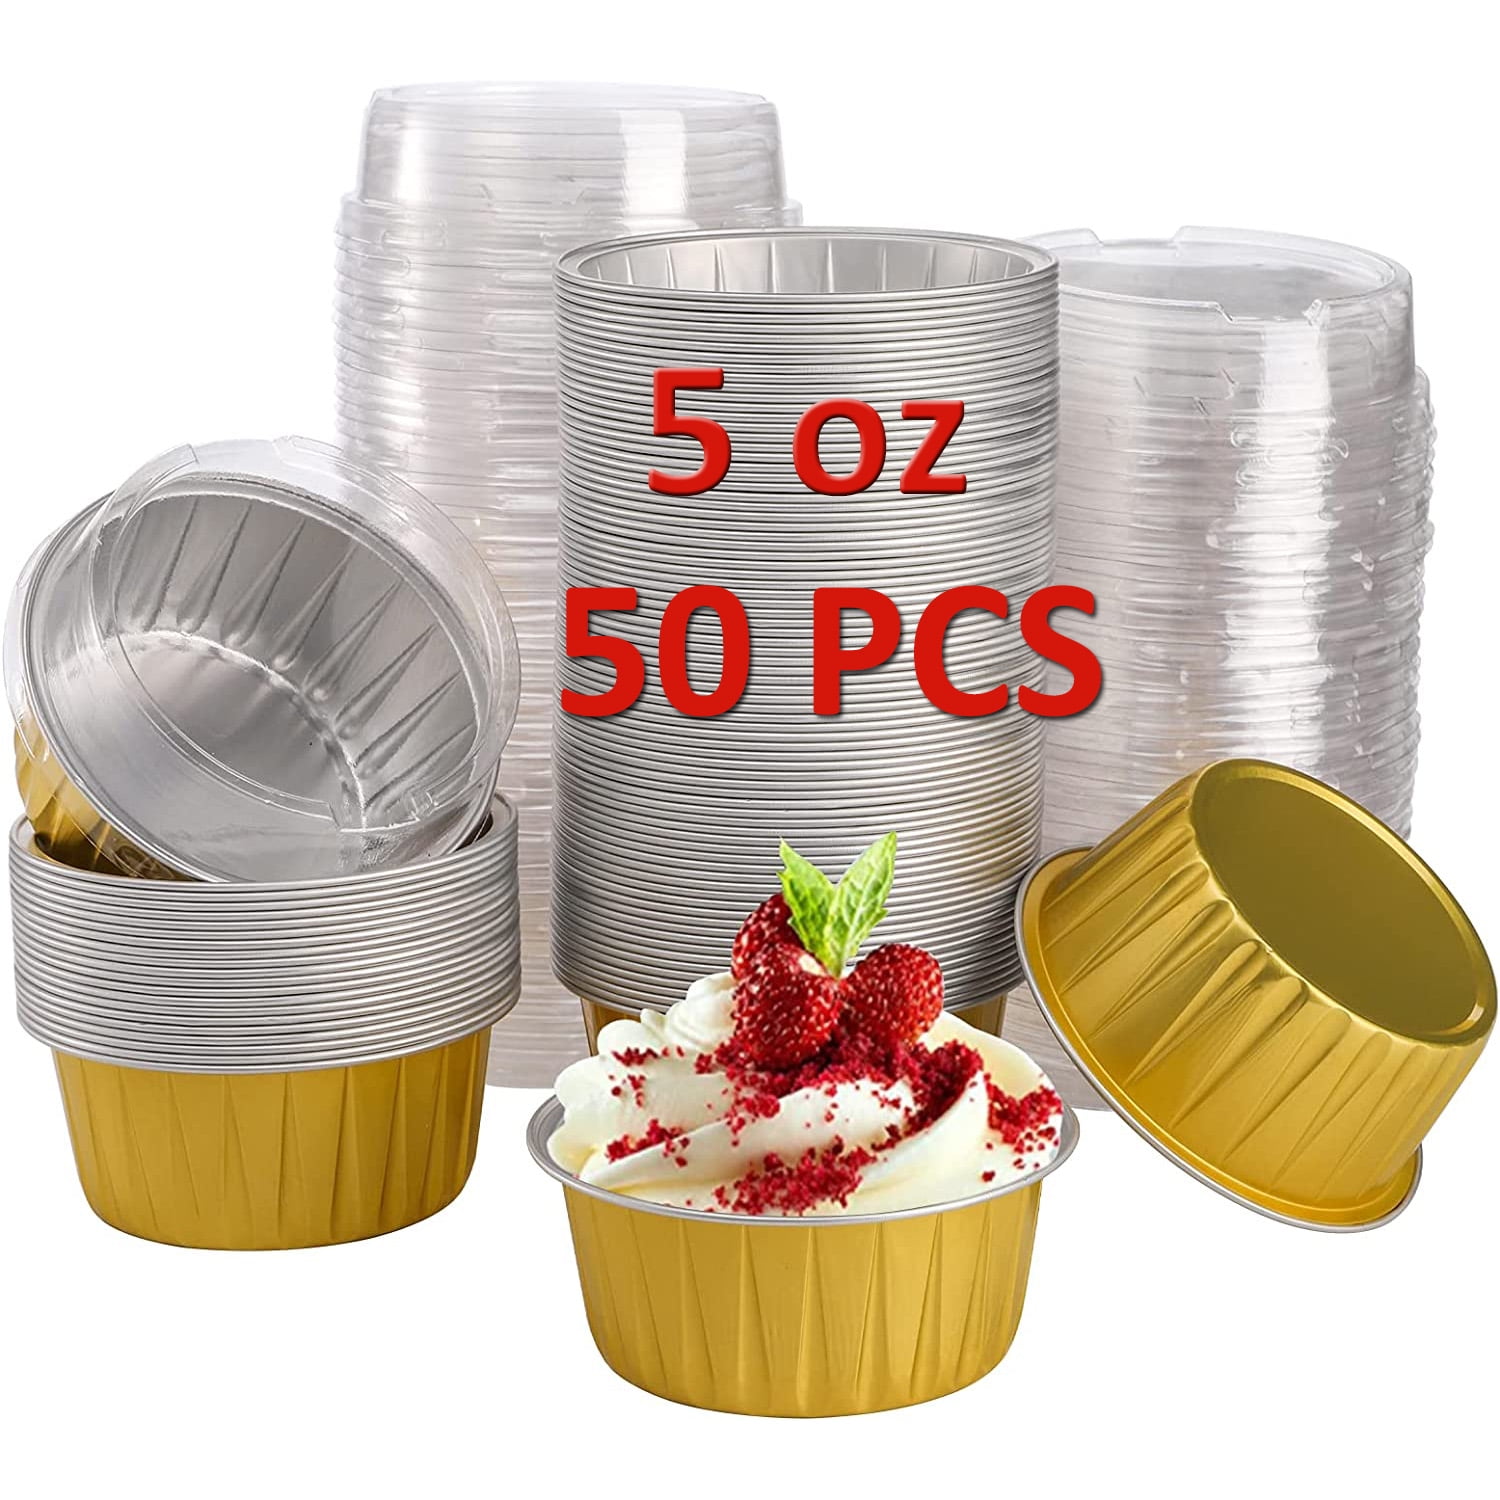 STANDARD Foil Cupcake Liners / Baking Cups – 50 ct ROYAL BLUE